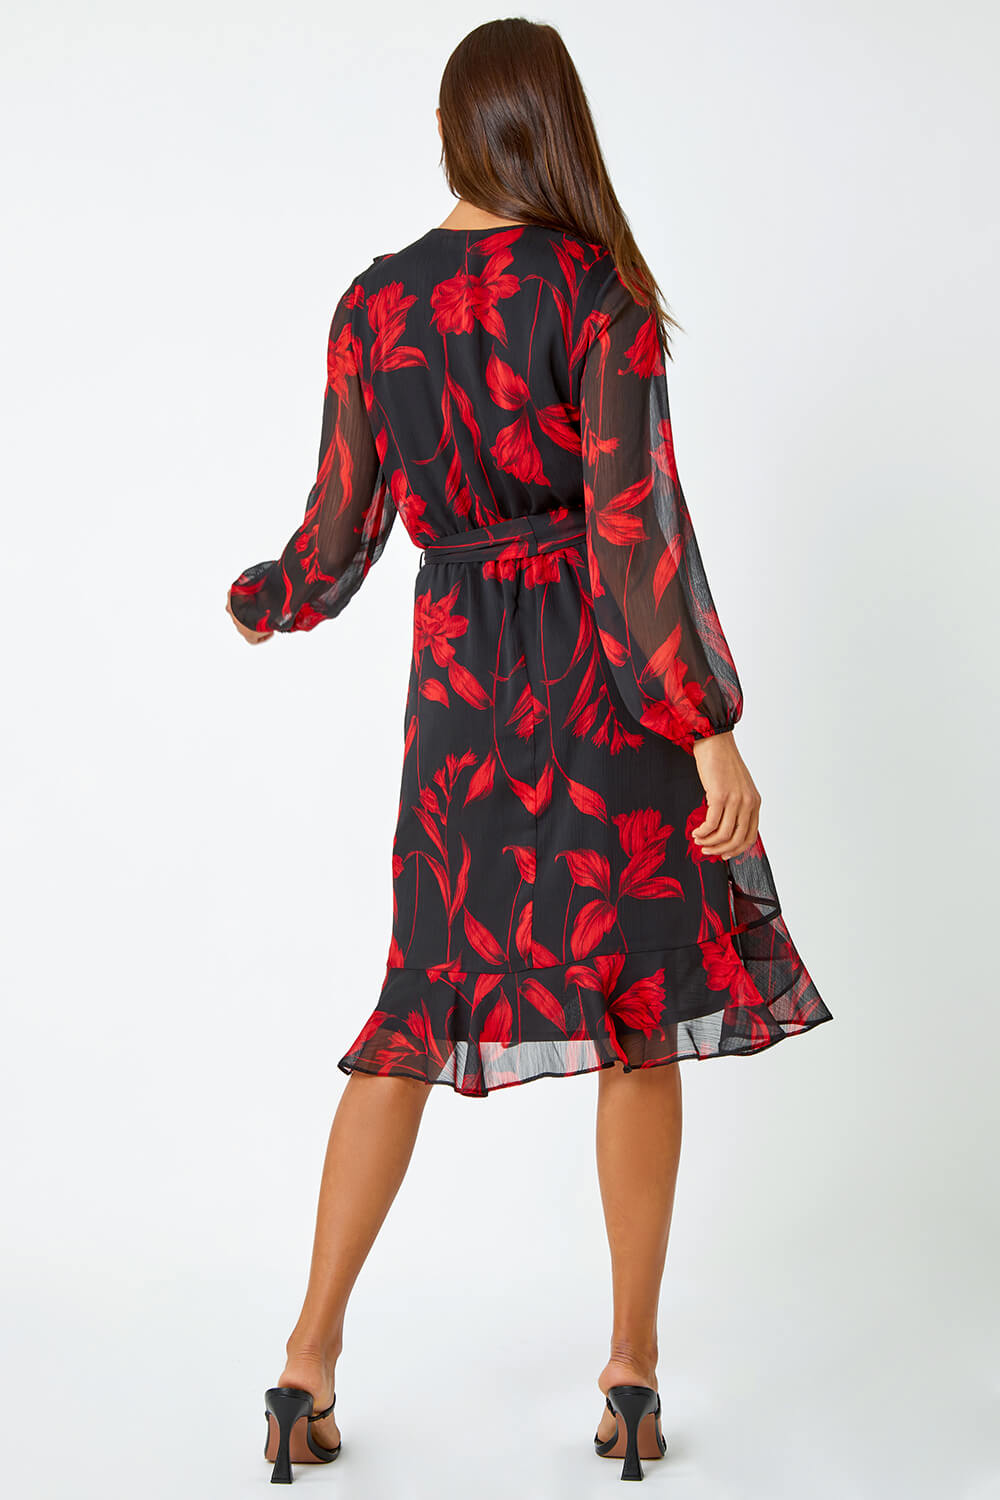 Red Floral Chiffon Frill Wrap Dress, Image 3 of 5